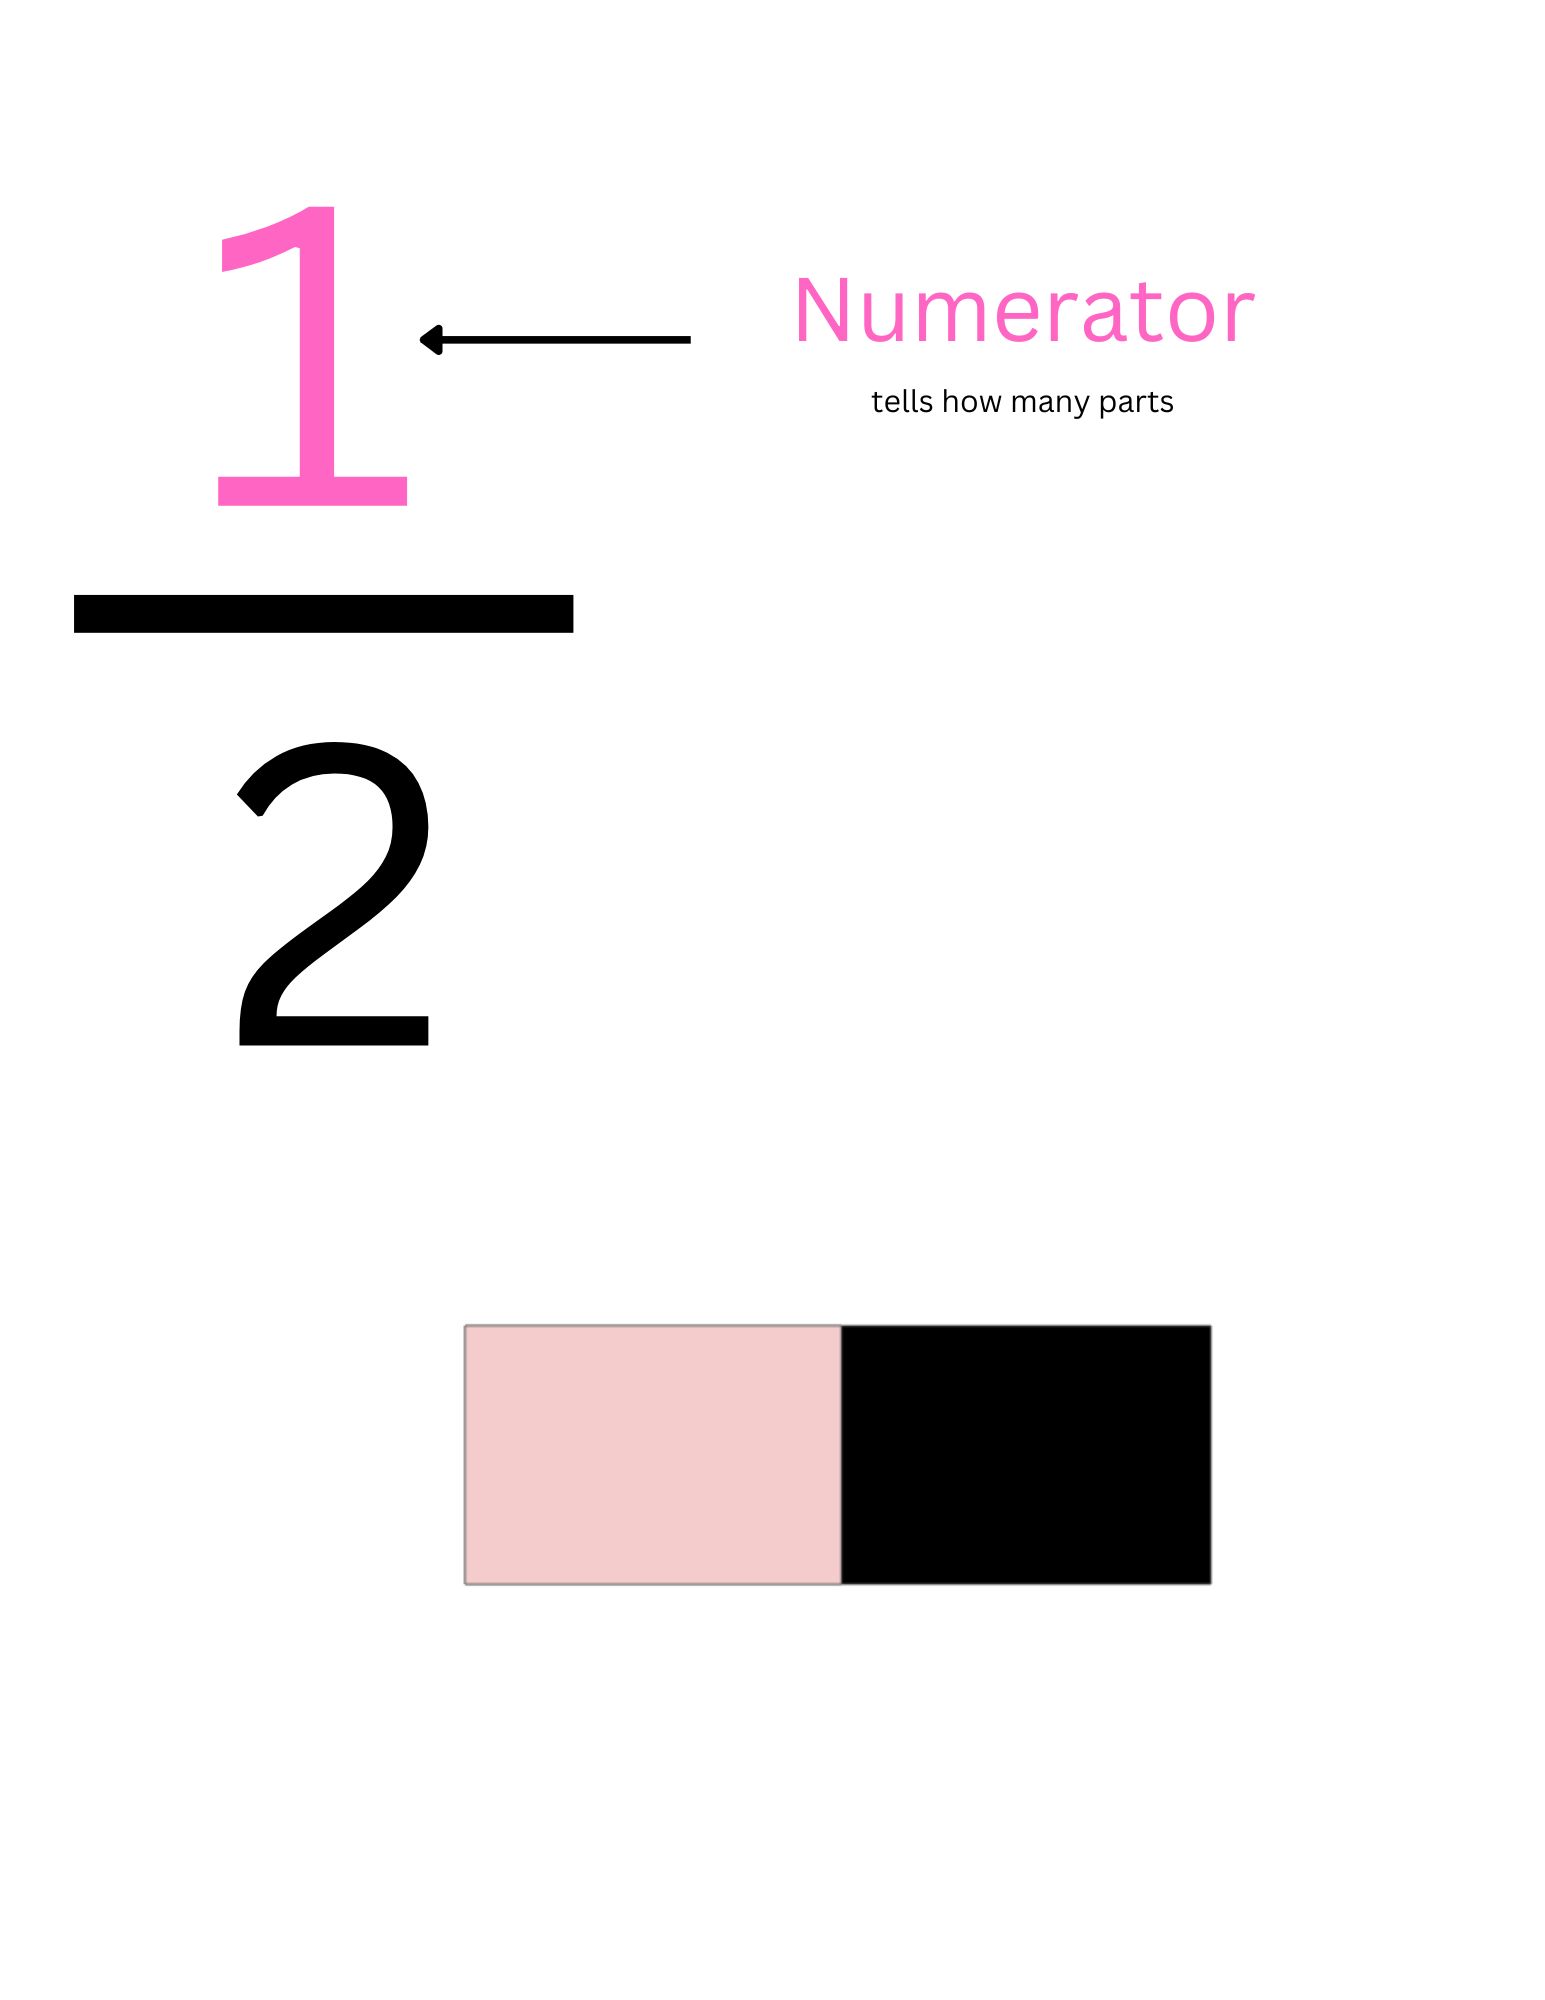 What is a Numerator?